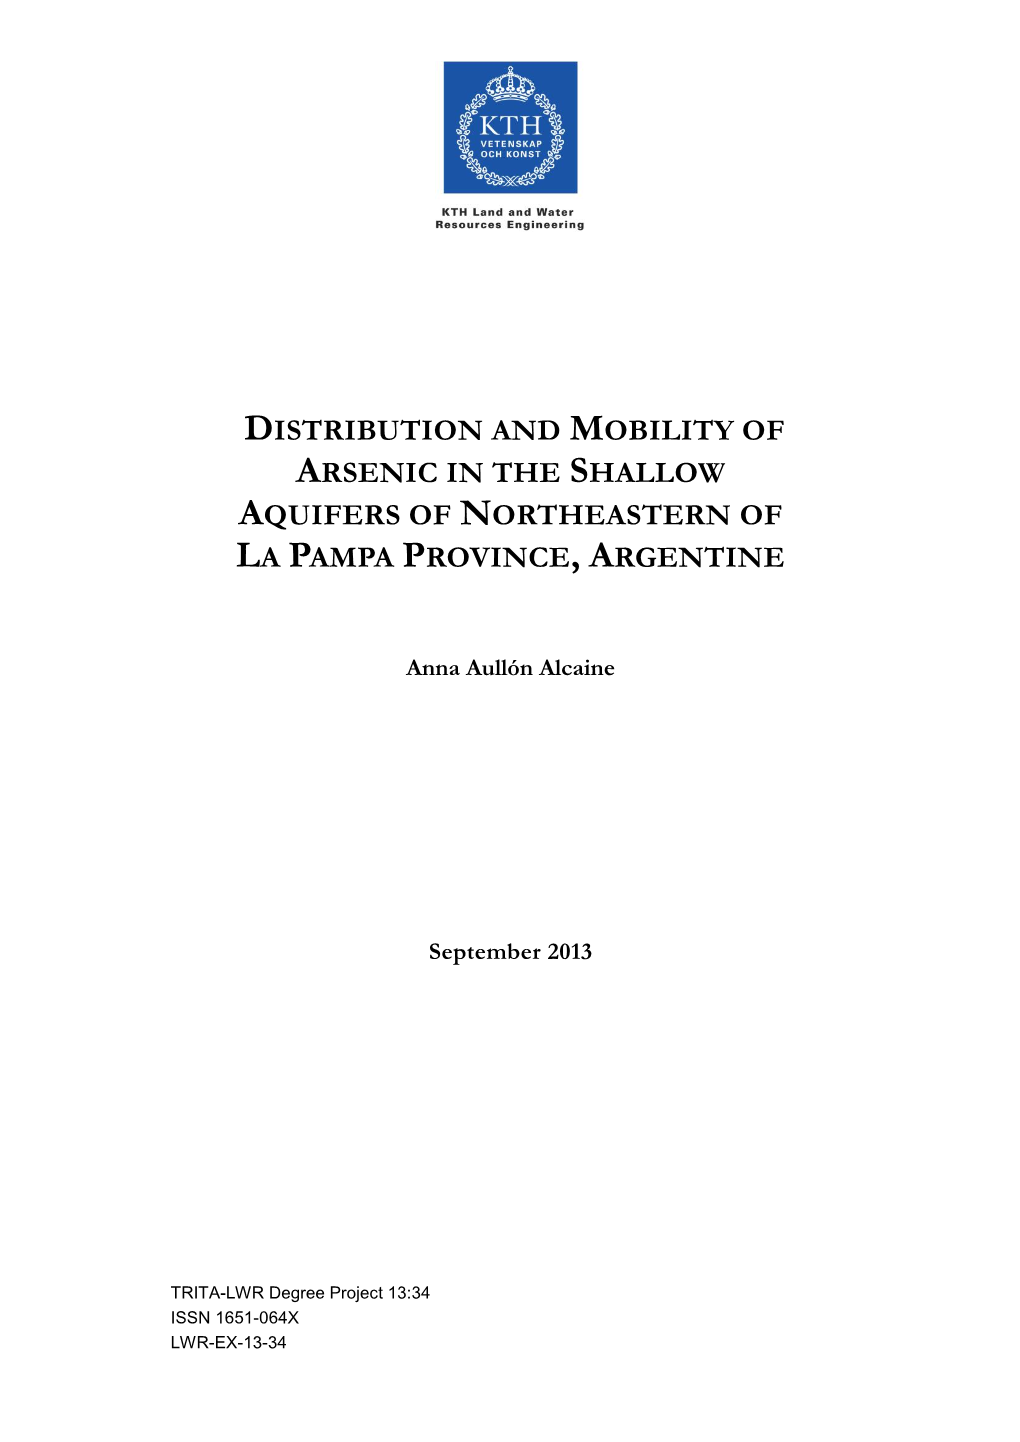 Distribution and Mobility of Arsenic in the Shallow Aquifers of Northeastern of La Pampa Province, Argentine